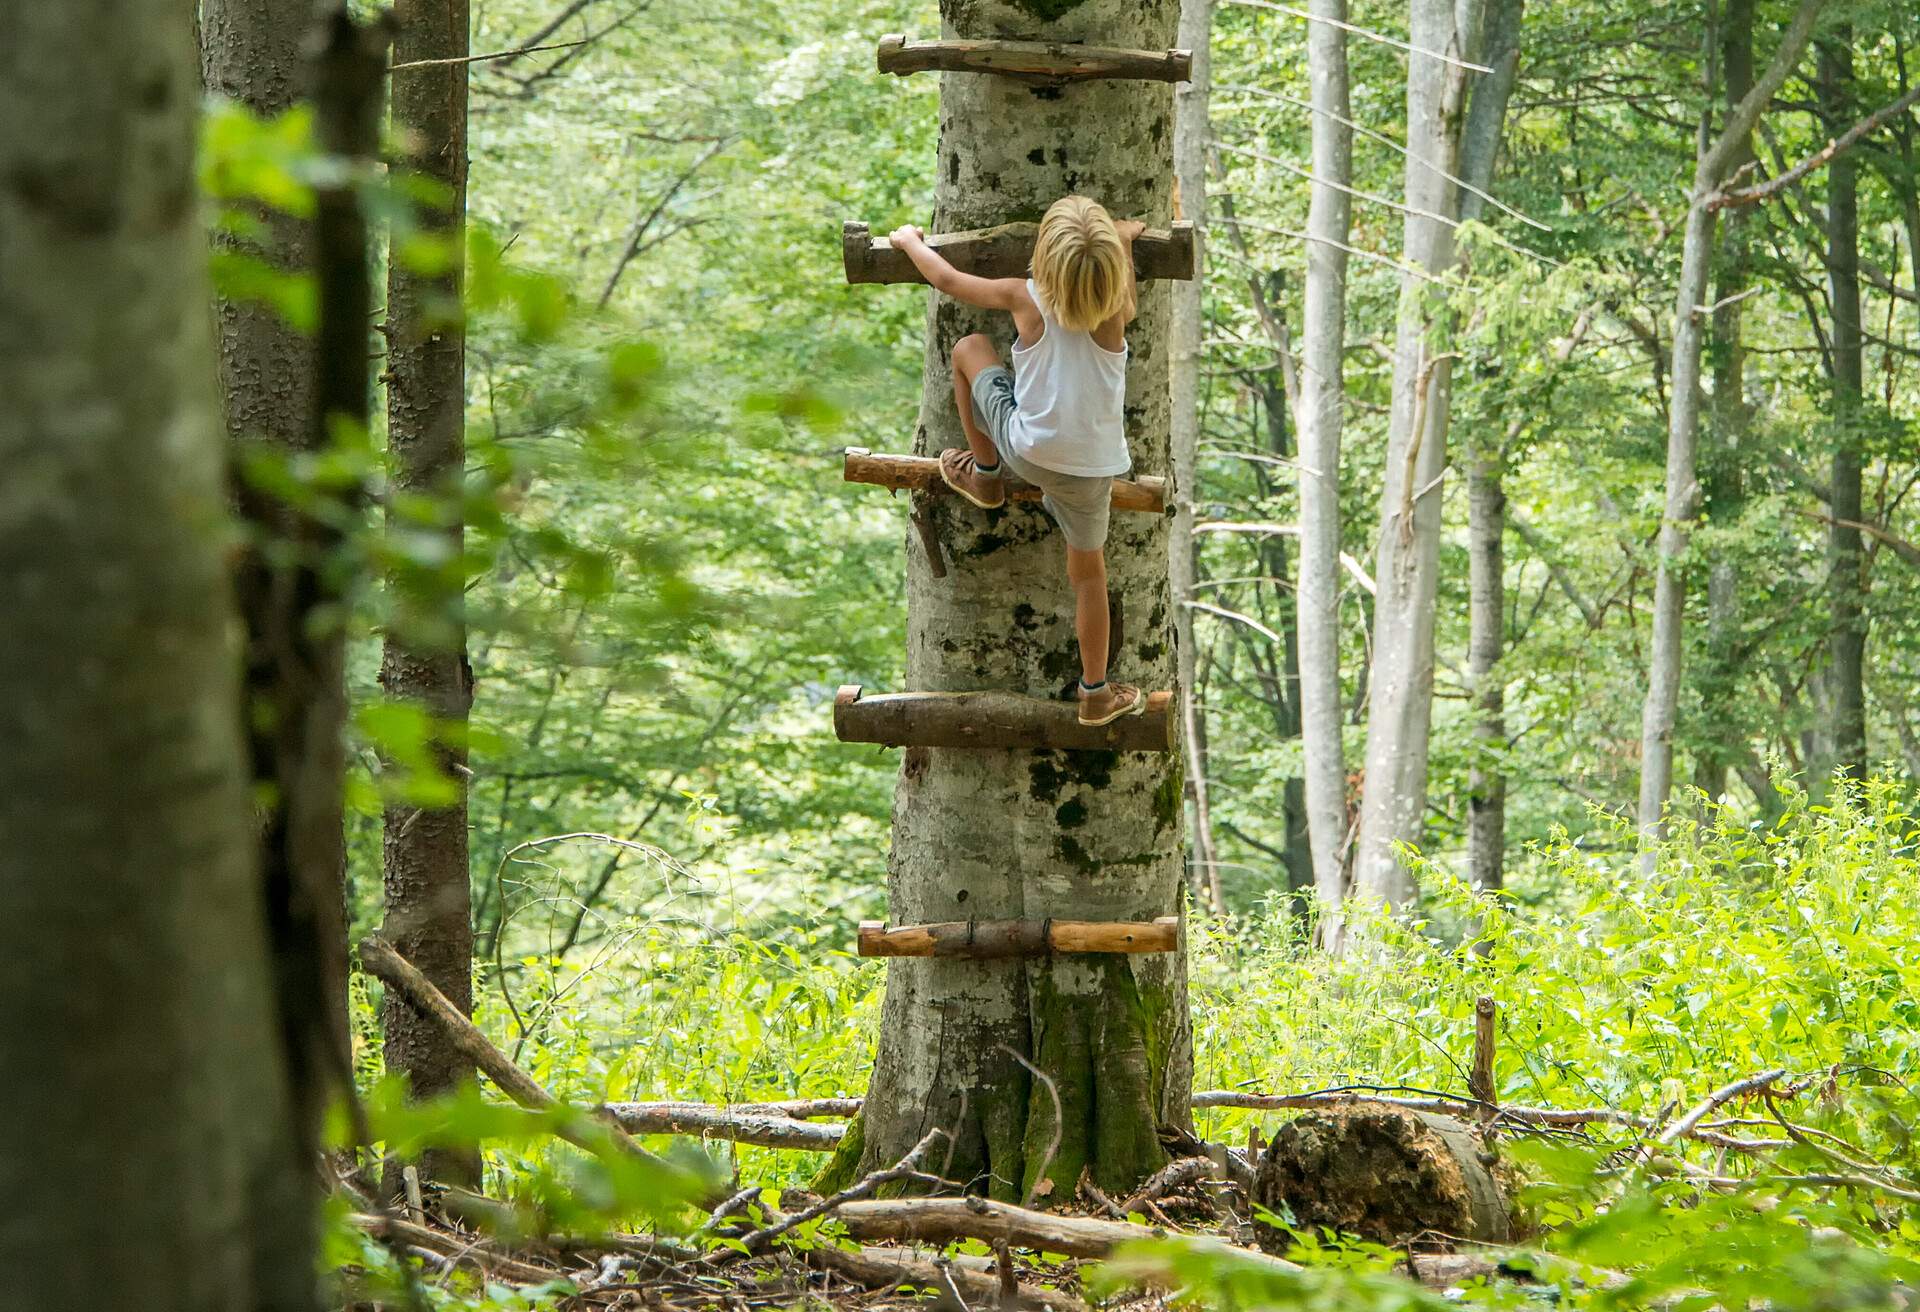 A child ascends a wooden ladder, carefully crafted with nails affixed to a sturdy tree.